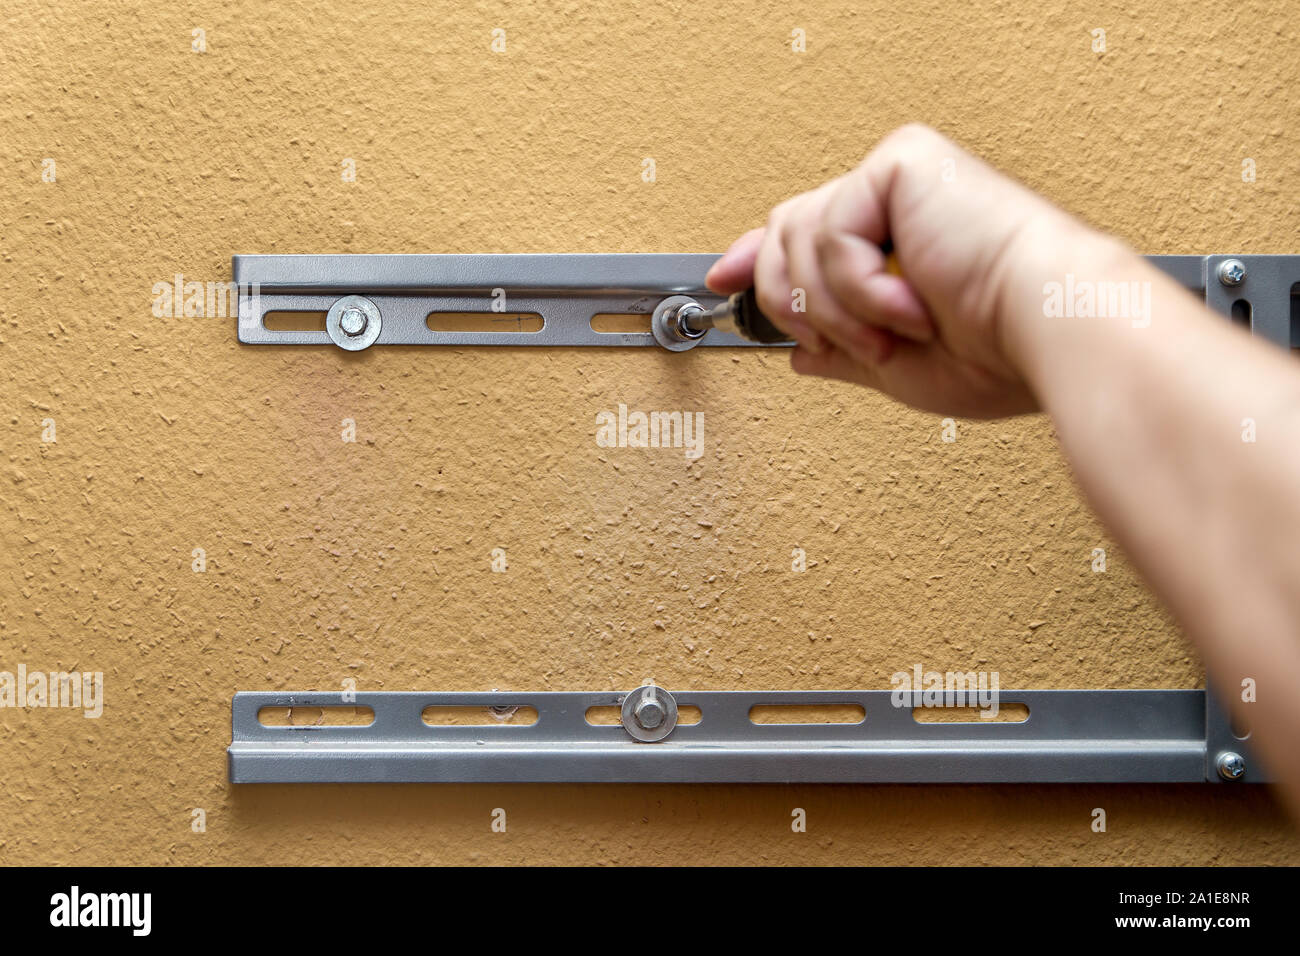 Service and installing, fitting bracket for a tv on the wall, closeup Stock Photo